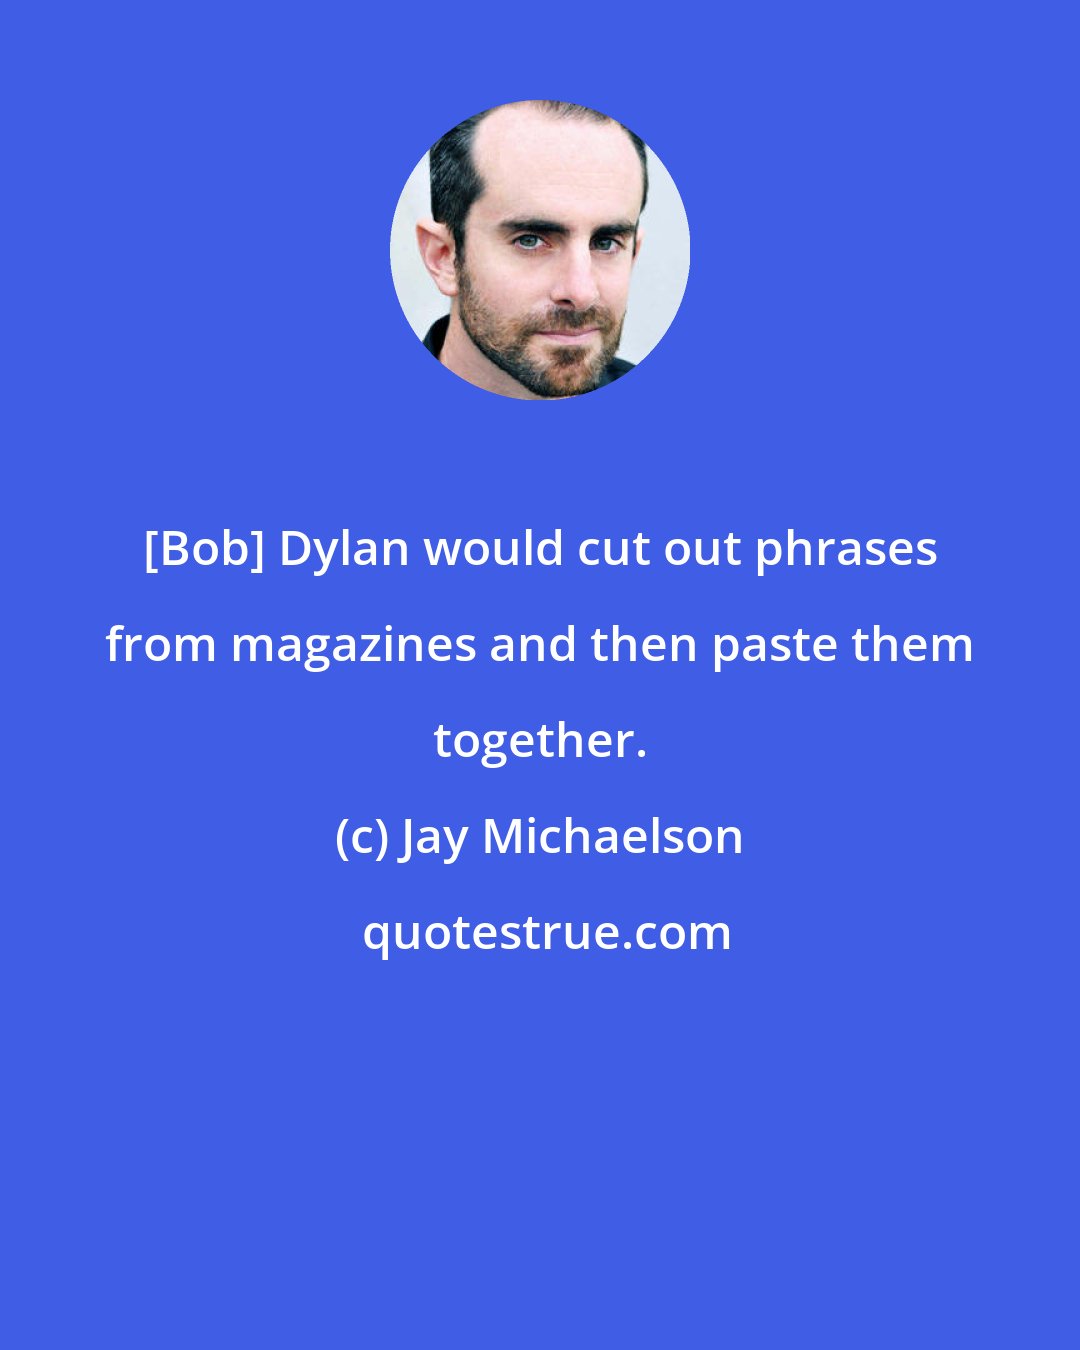 Jay Michaelson: [Bob] Dylan would cut out phrases from magazines and then paste them together.